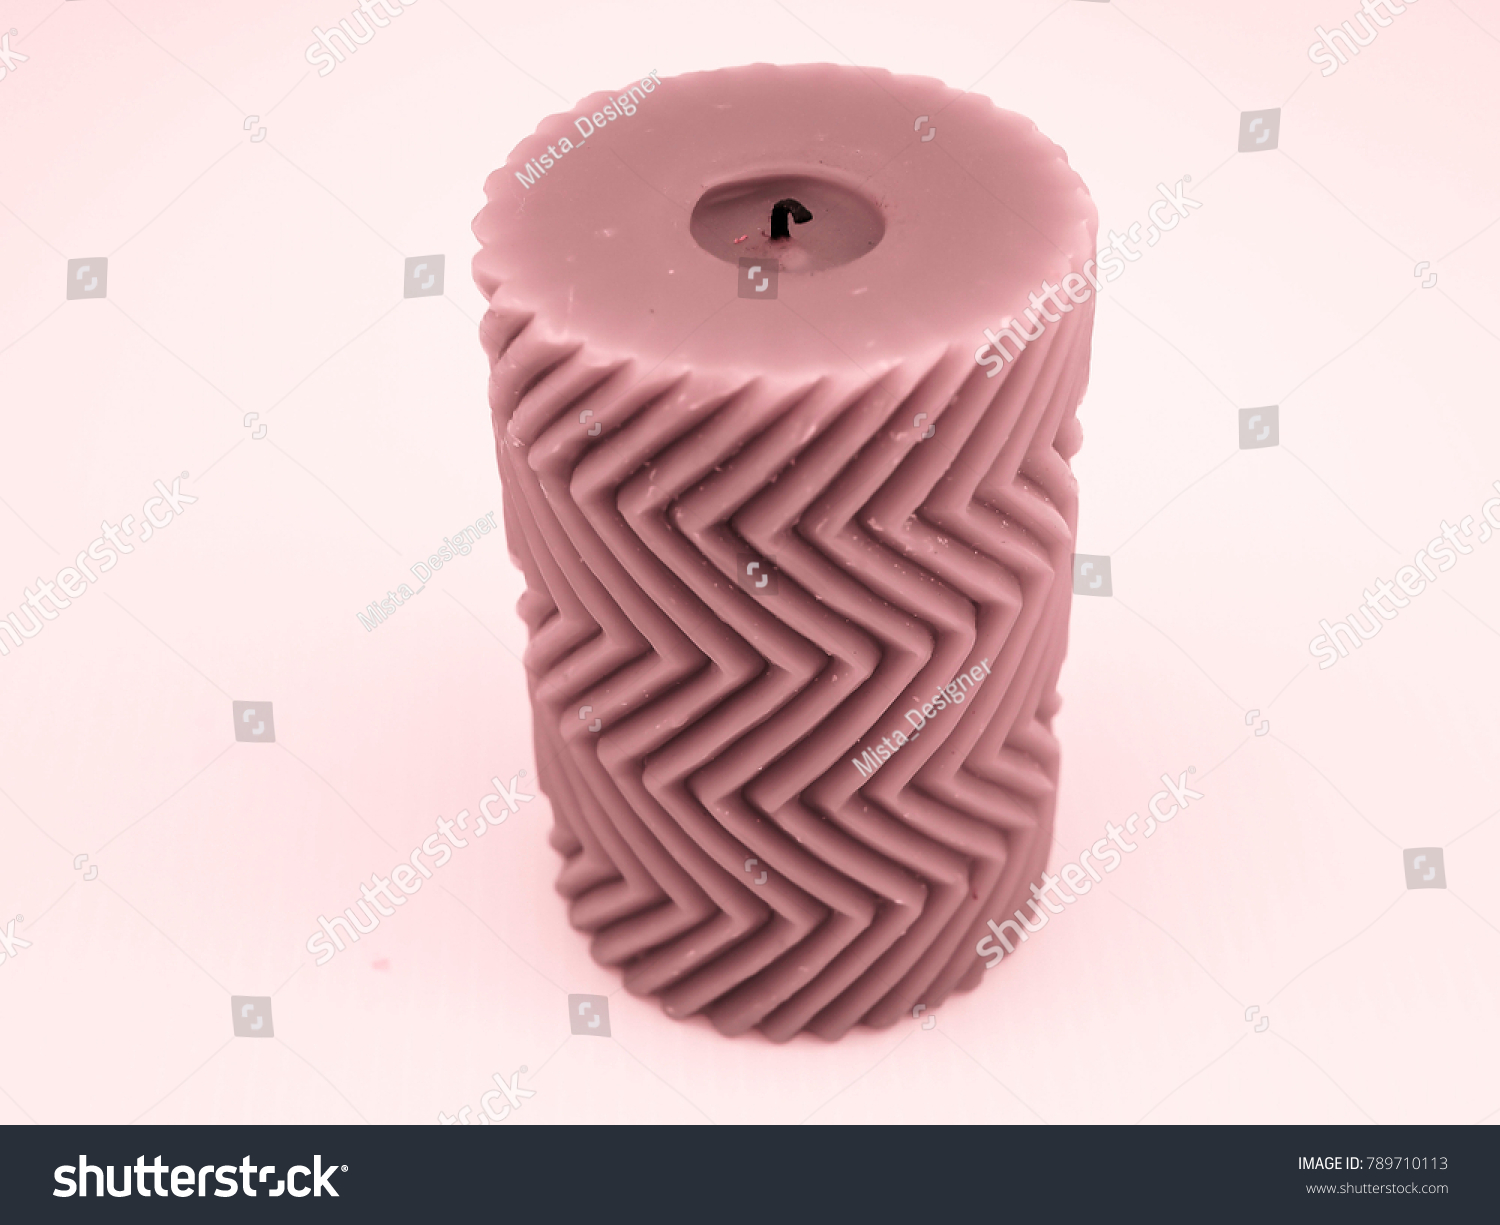 Pink candle with a zigzag pattern #789710113